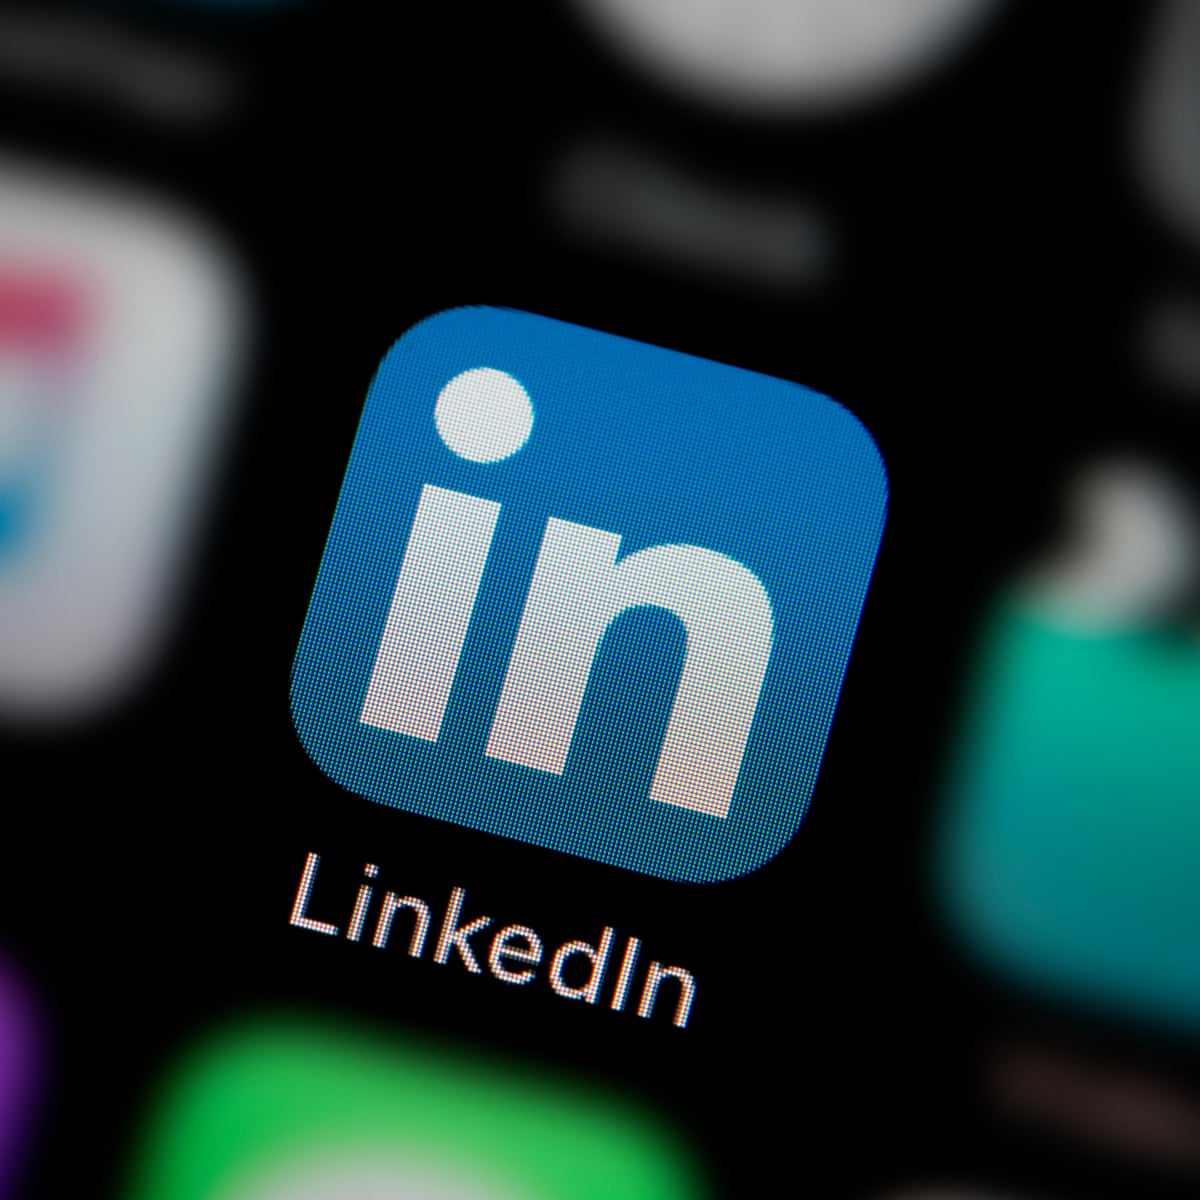 Professional networking platform LinkedIn introduces ‘collaborative articles’ powered by AI.